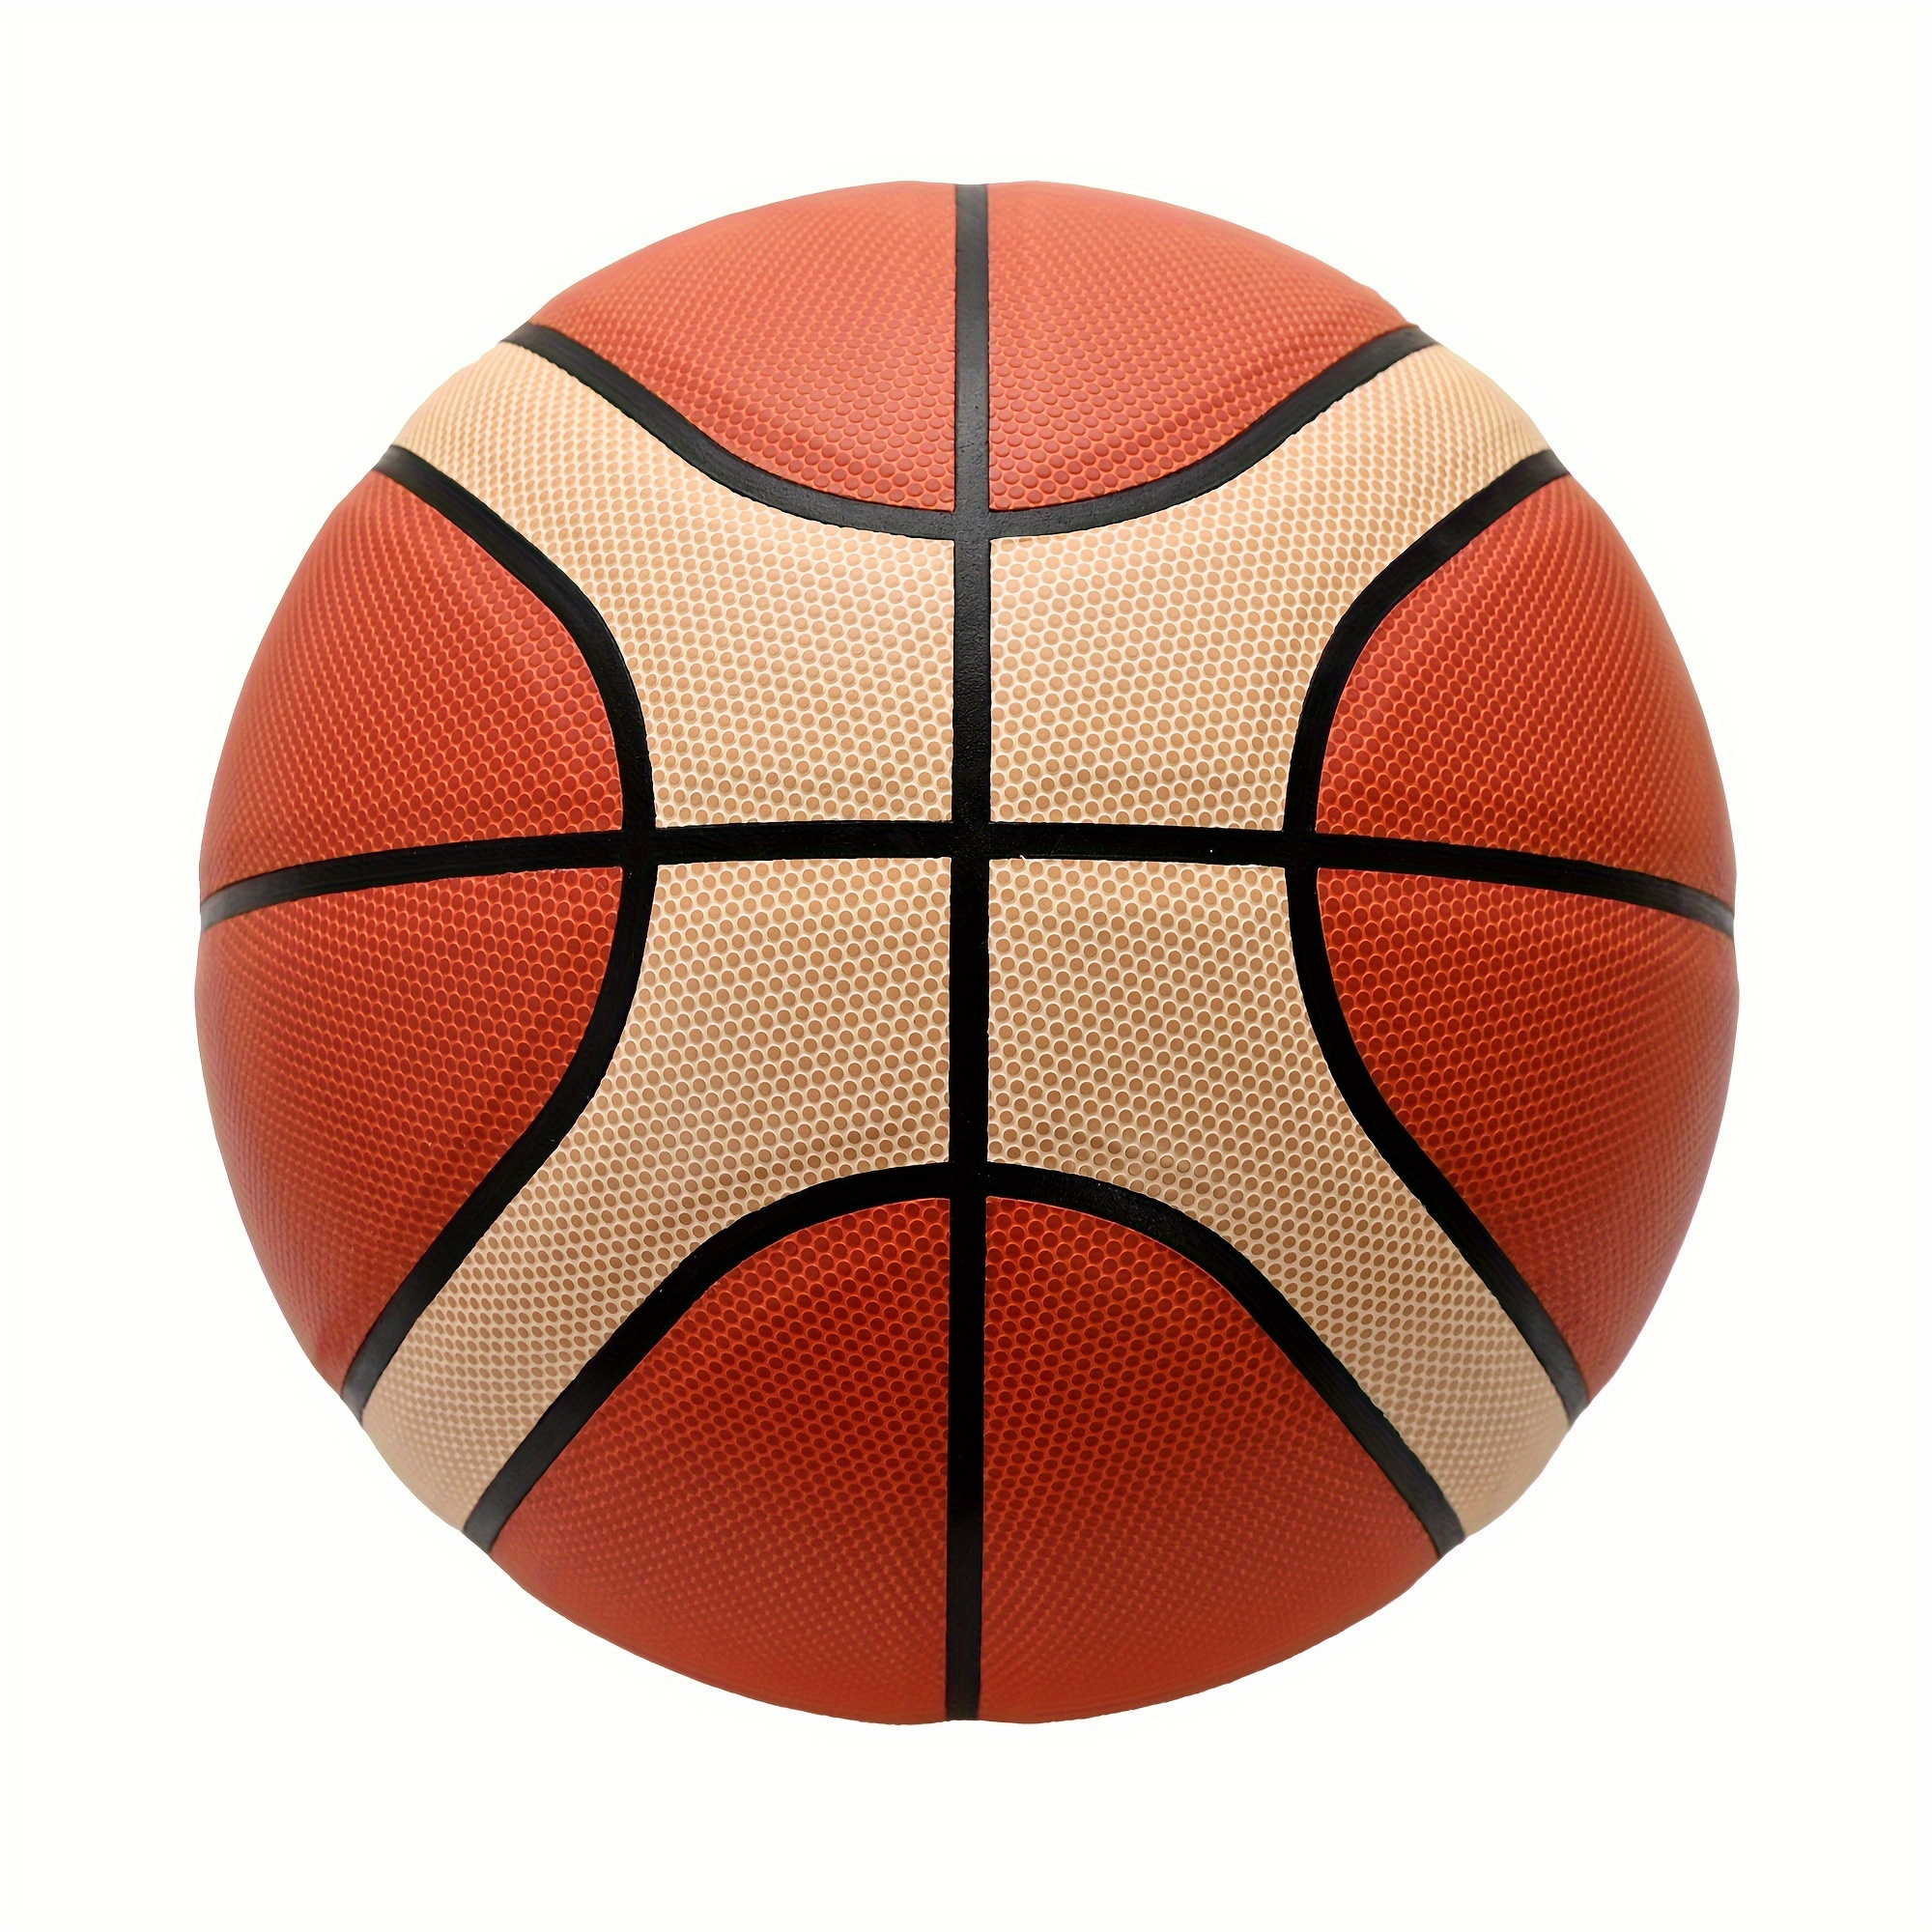 

1pc Size 7 Sports Basketball, Durable Pu Basketball For Competitive Games, Holiday Gift For Basketball Lovers